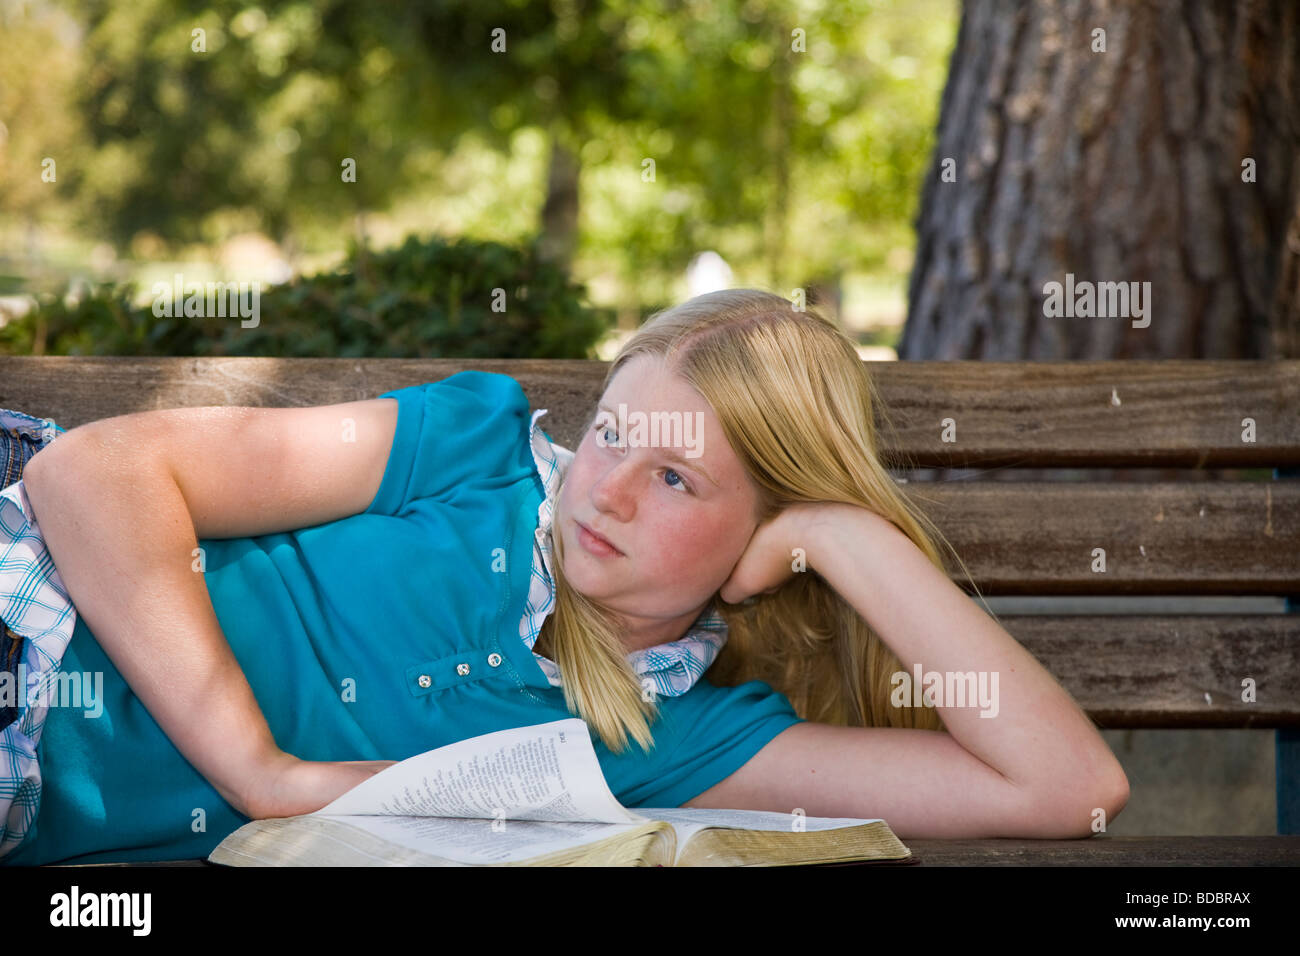 11 12 13 year old child children young person people Tween tweens Caucasian Junior high girl meditating reflecting thoughtful dreaming sitting     © Myrleen Pearson Stock Photo